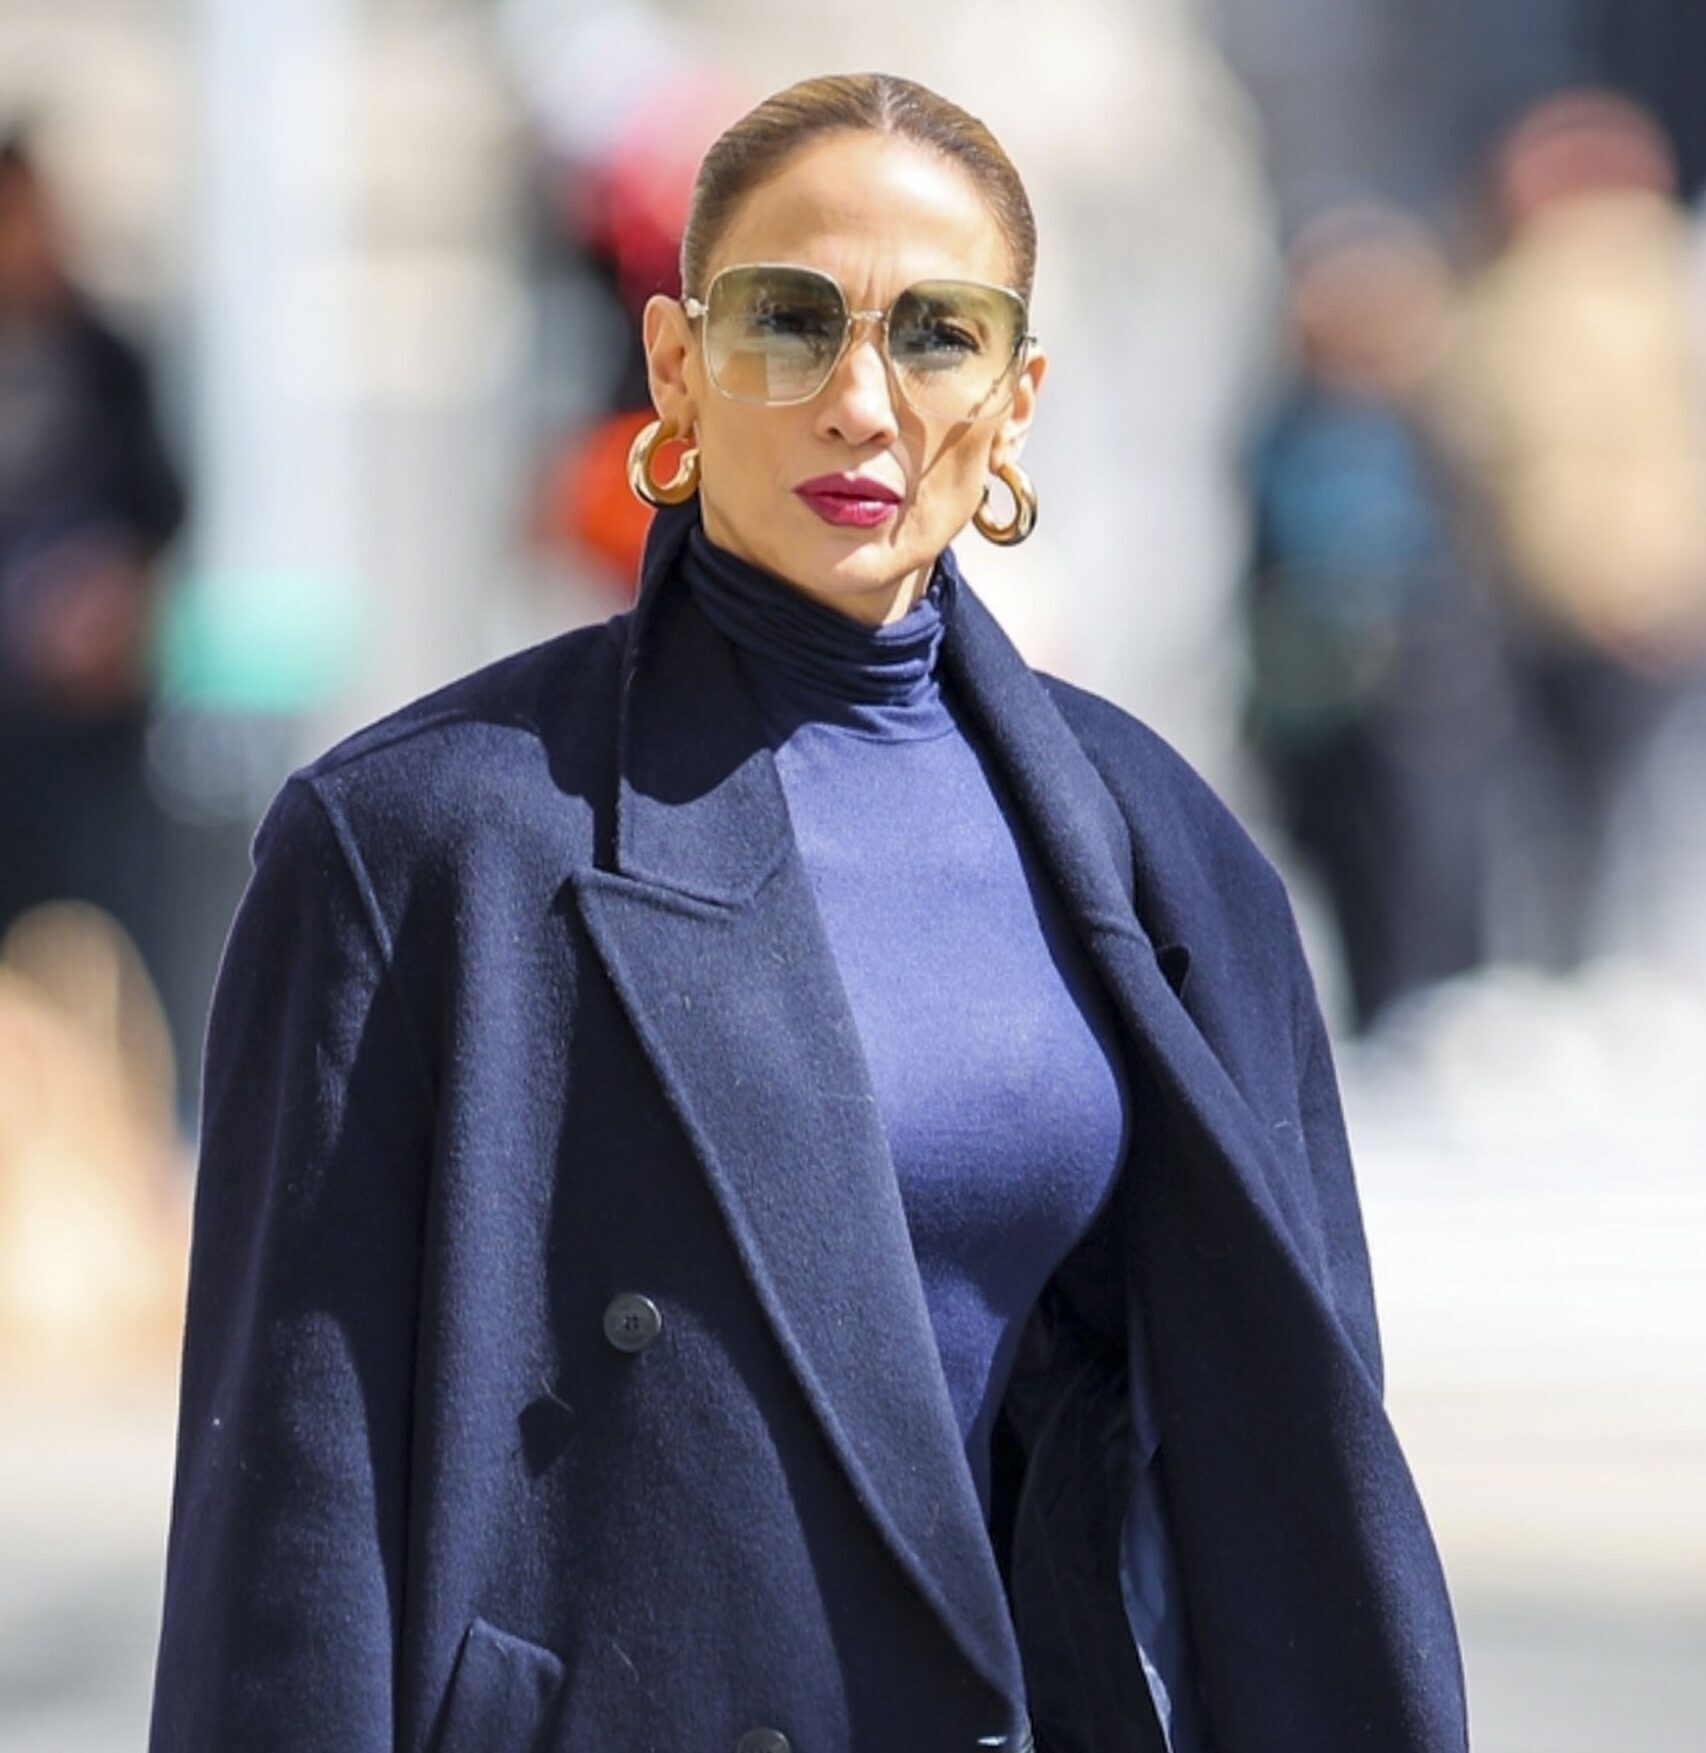 Jennifer Lopez Shines In Signature Sunshine Style With Gucci Sunglasses in NYC